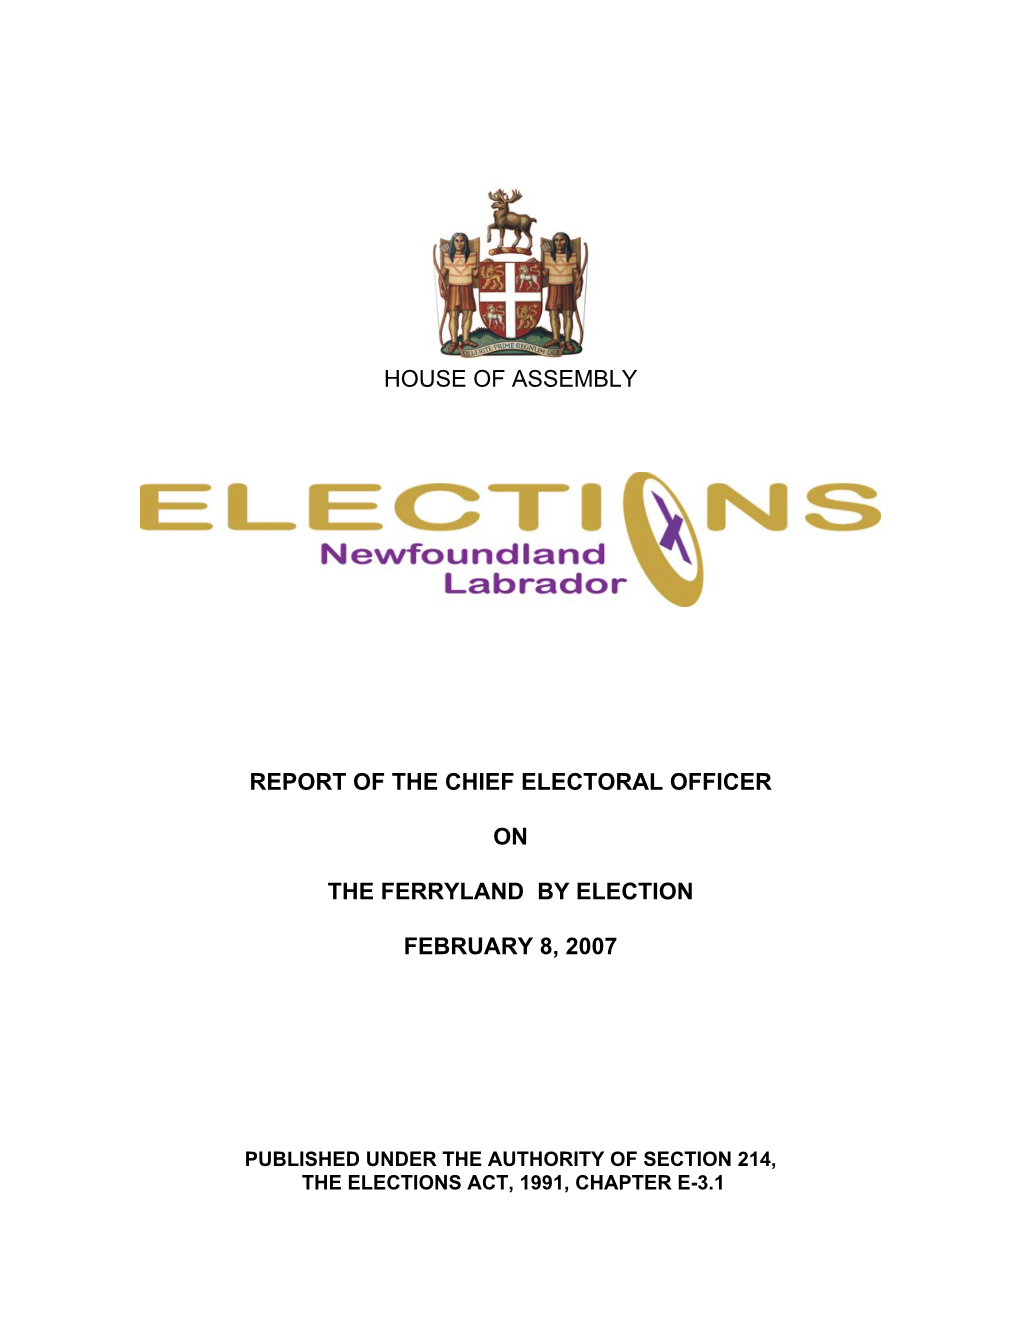 Ferryland by Election